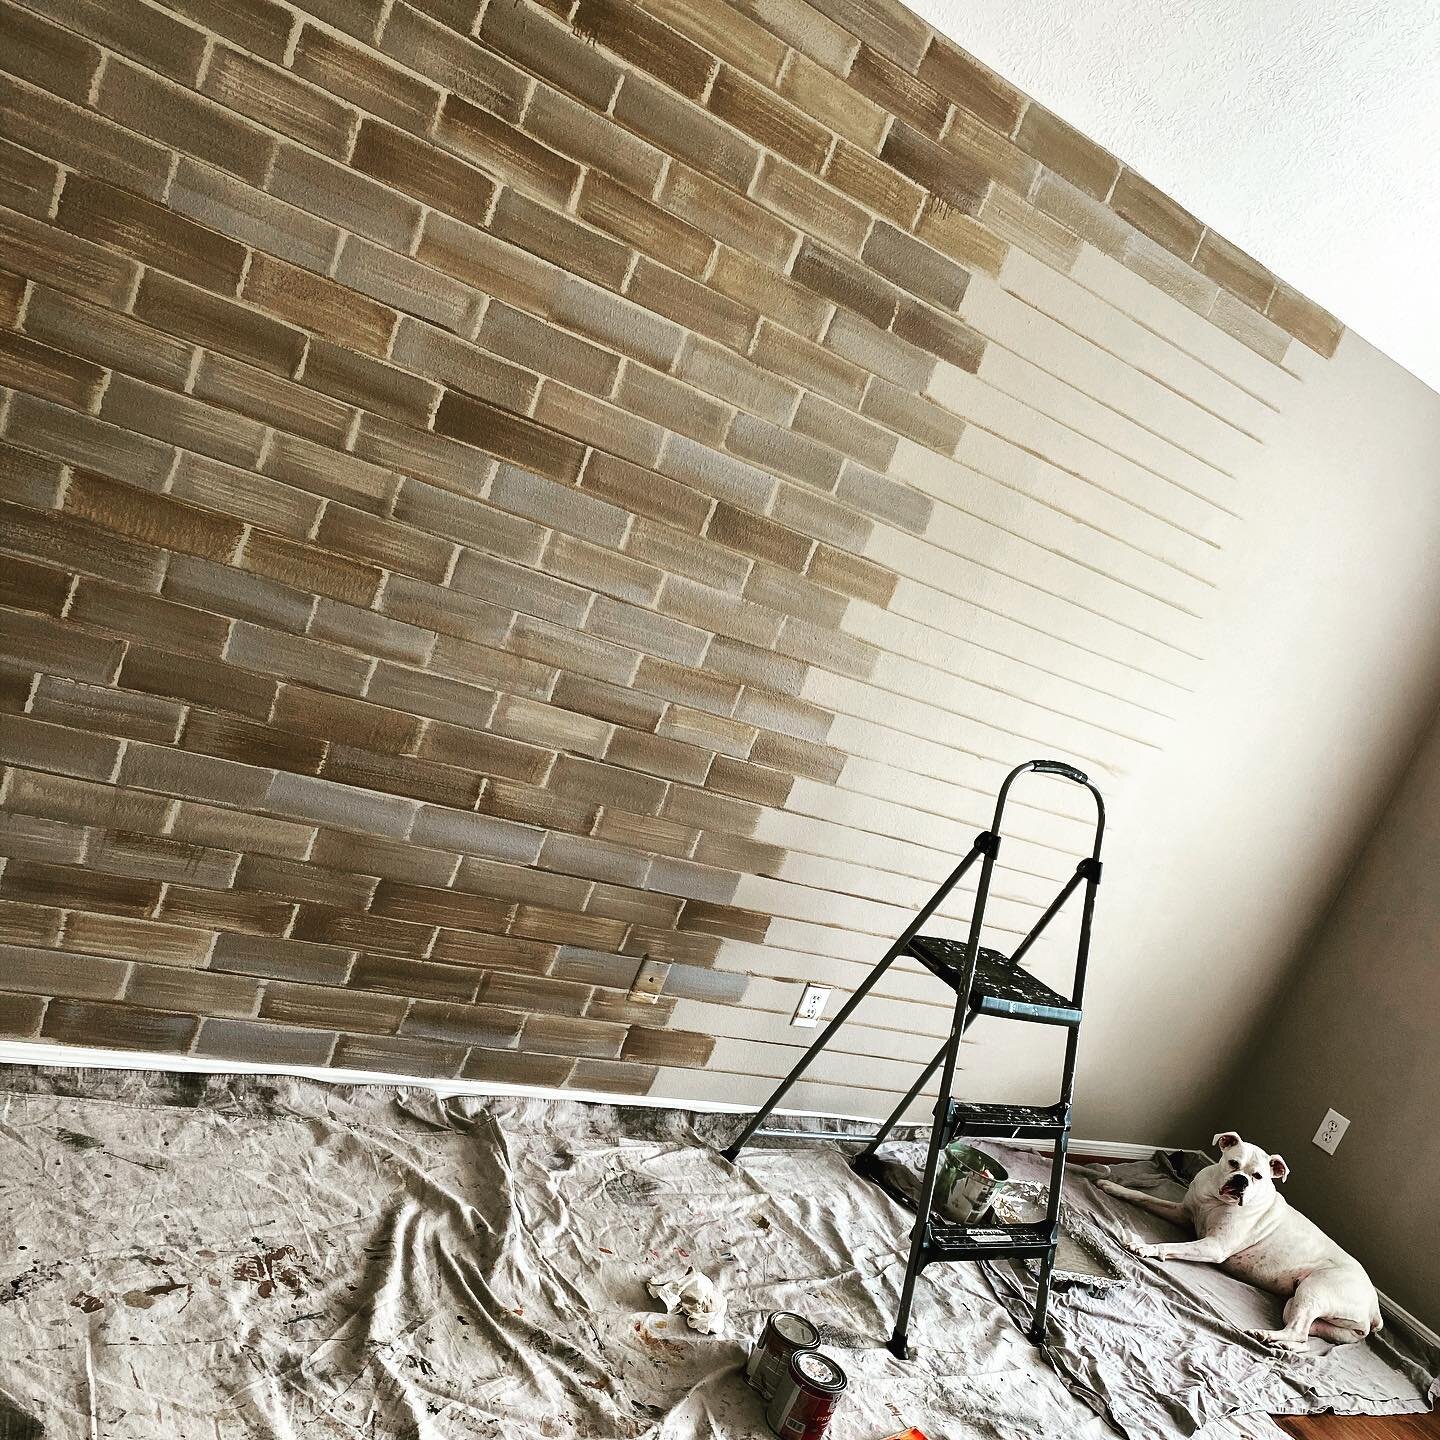 Step one of a faux brick wall! This is my 4th nursery in a month! #mural #nurserydecor #fauxbrick #brickwall #fauxpainting #interiordesign